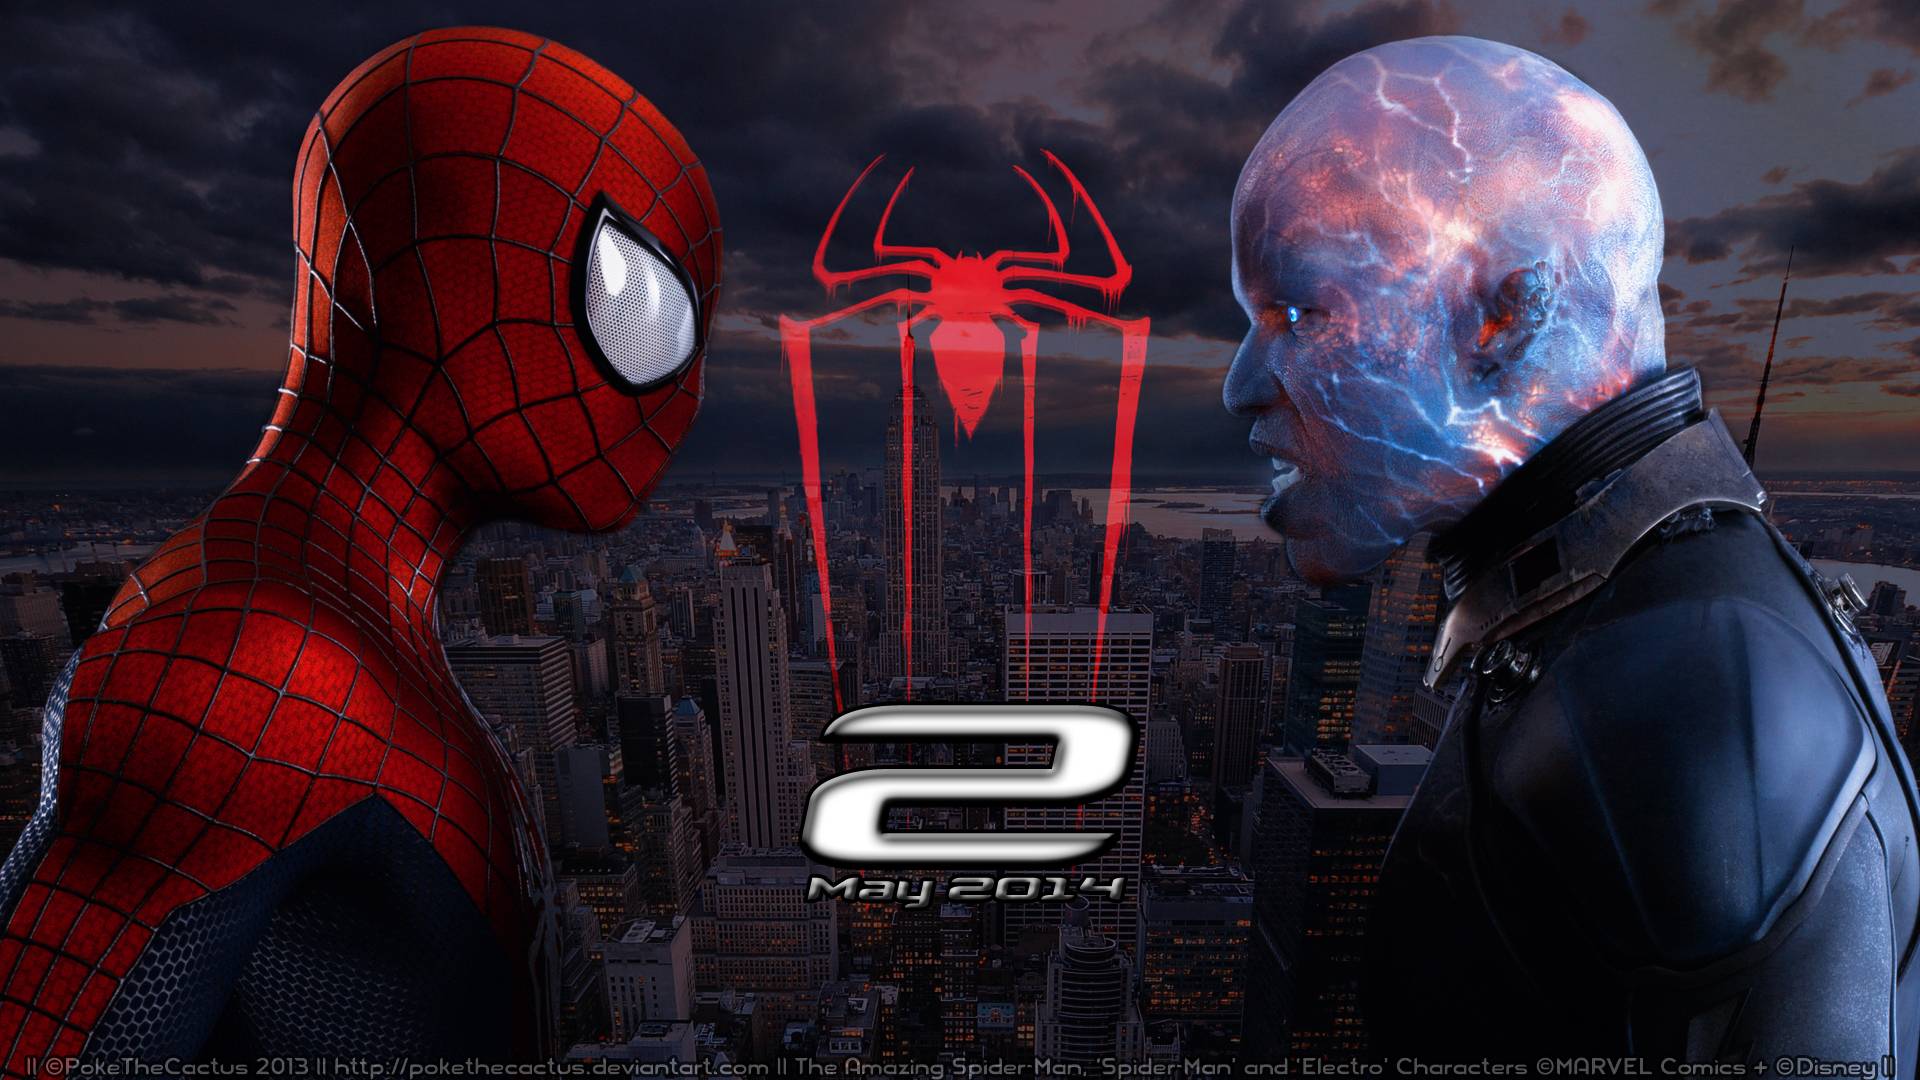 The Amazing Spider-Man 2 Wallpaper 3738 Hd Wallpapers | ibwall.com